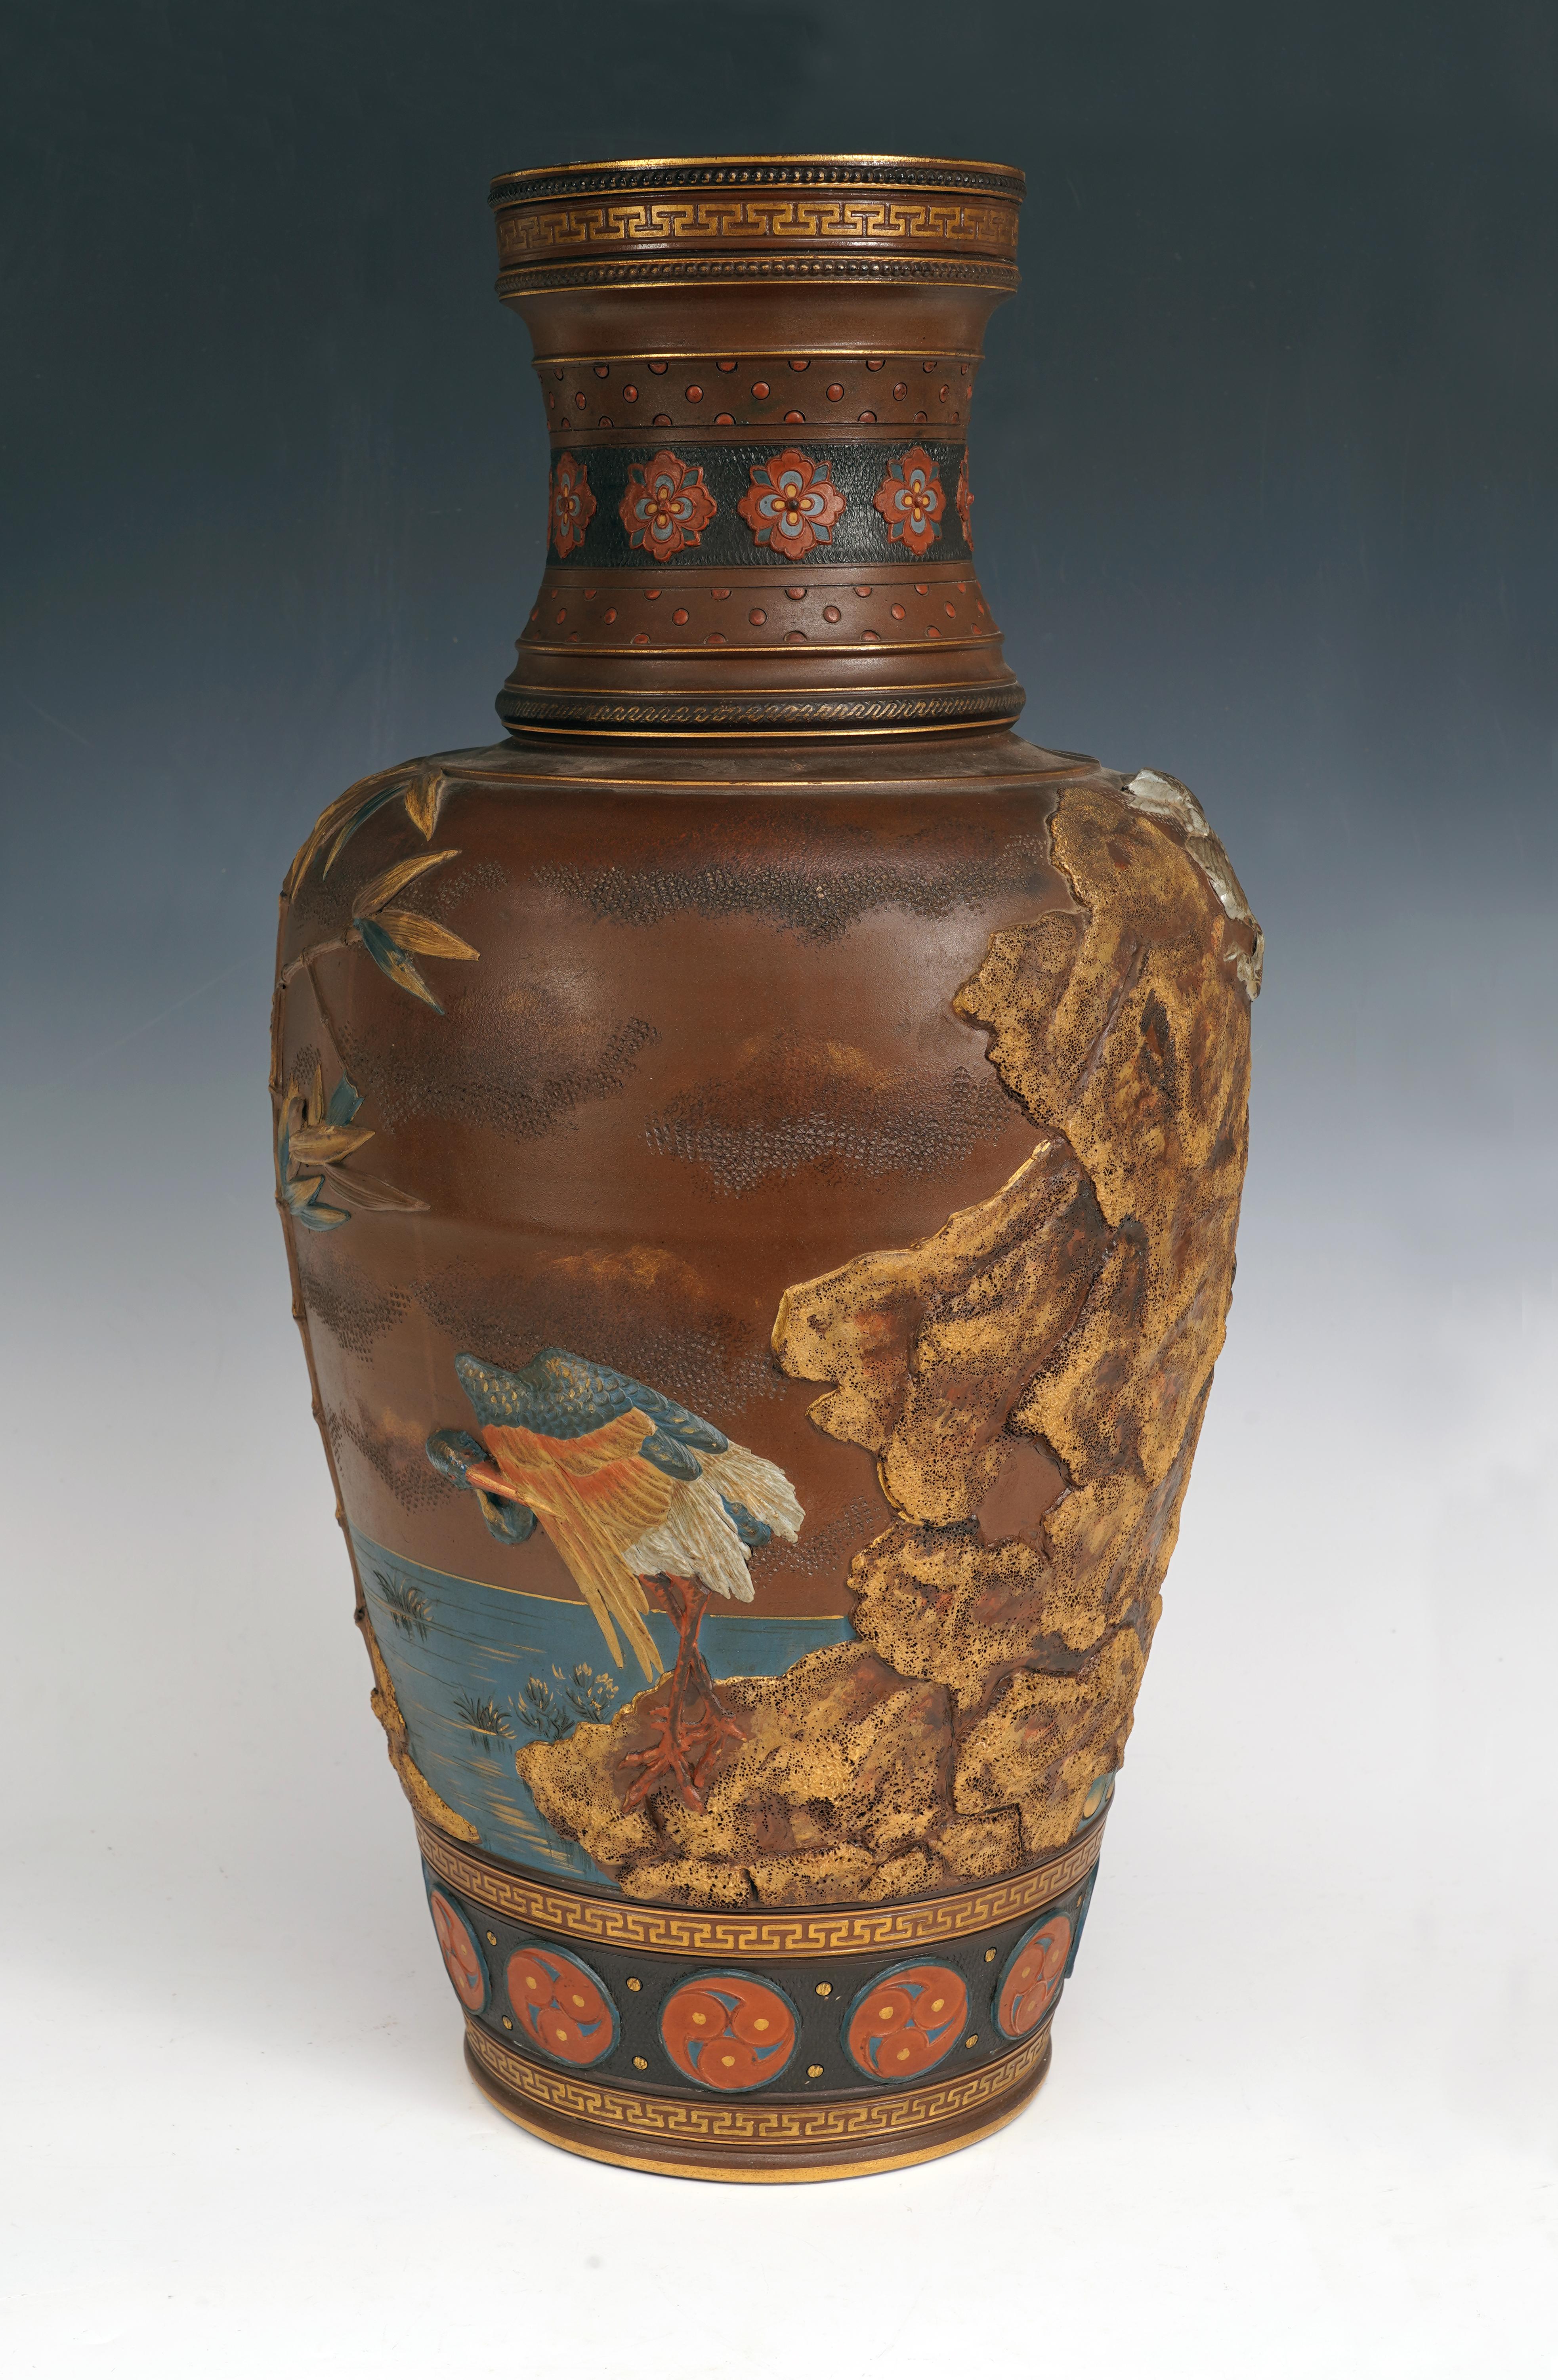 Model n° 1567

Beautiful Japanese inspired baluster-shaped vase in tinted stoneware. The rich polychrome rotating decoration illustrates cranes in the moonlight, near a lake lined with bamboo, and an eagle slaying a snake on top of a rock. The neck